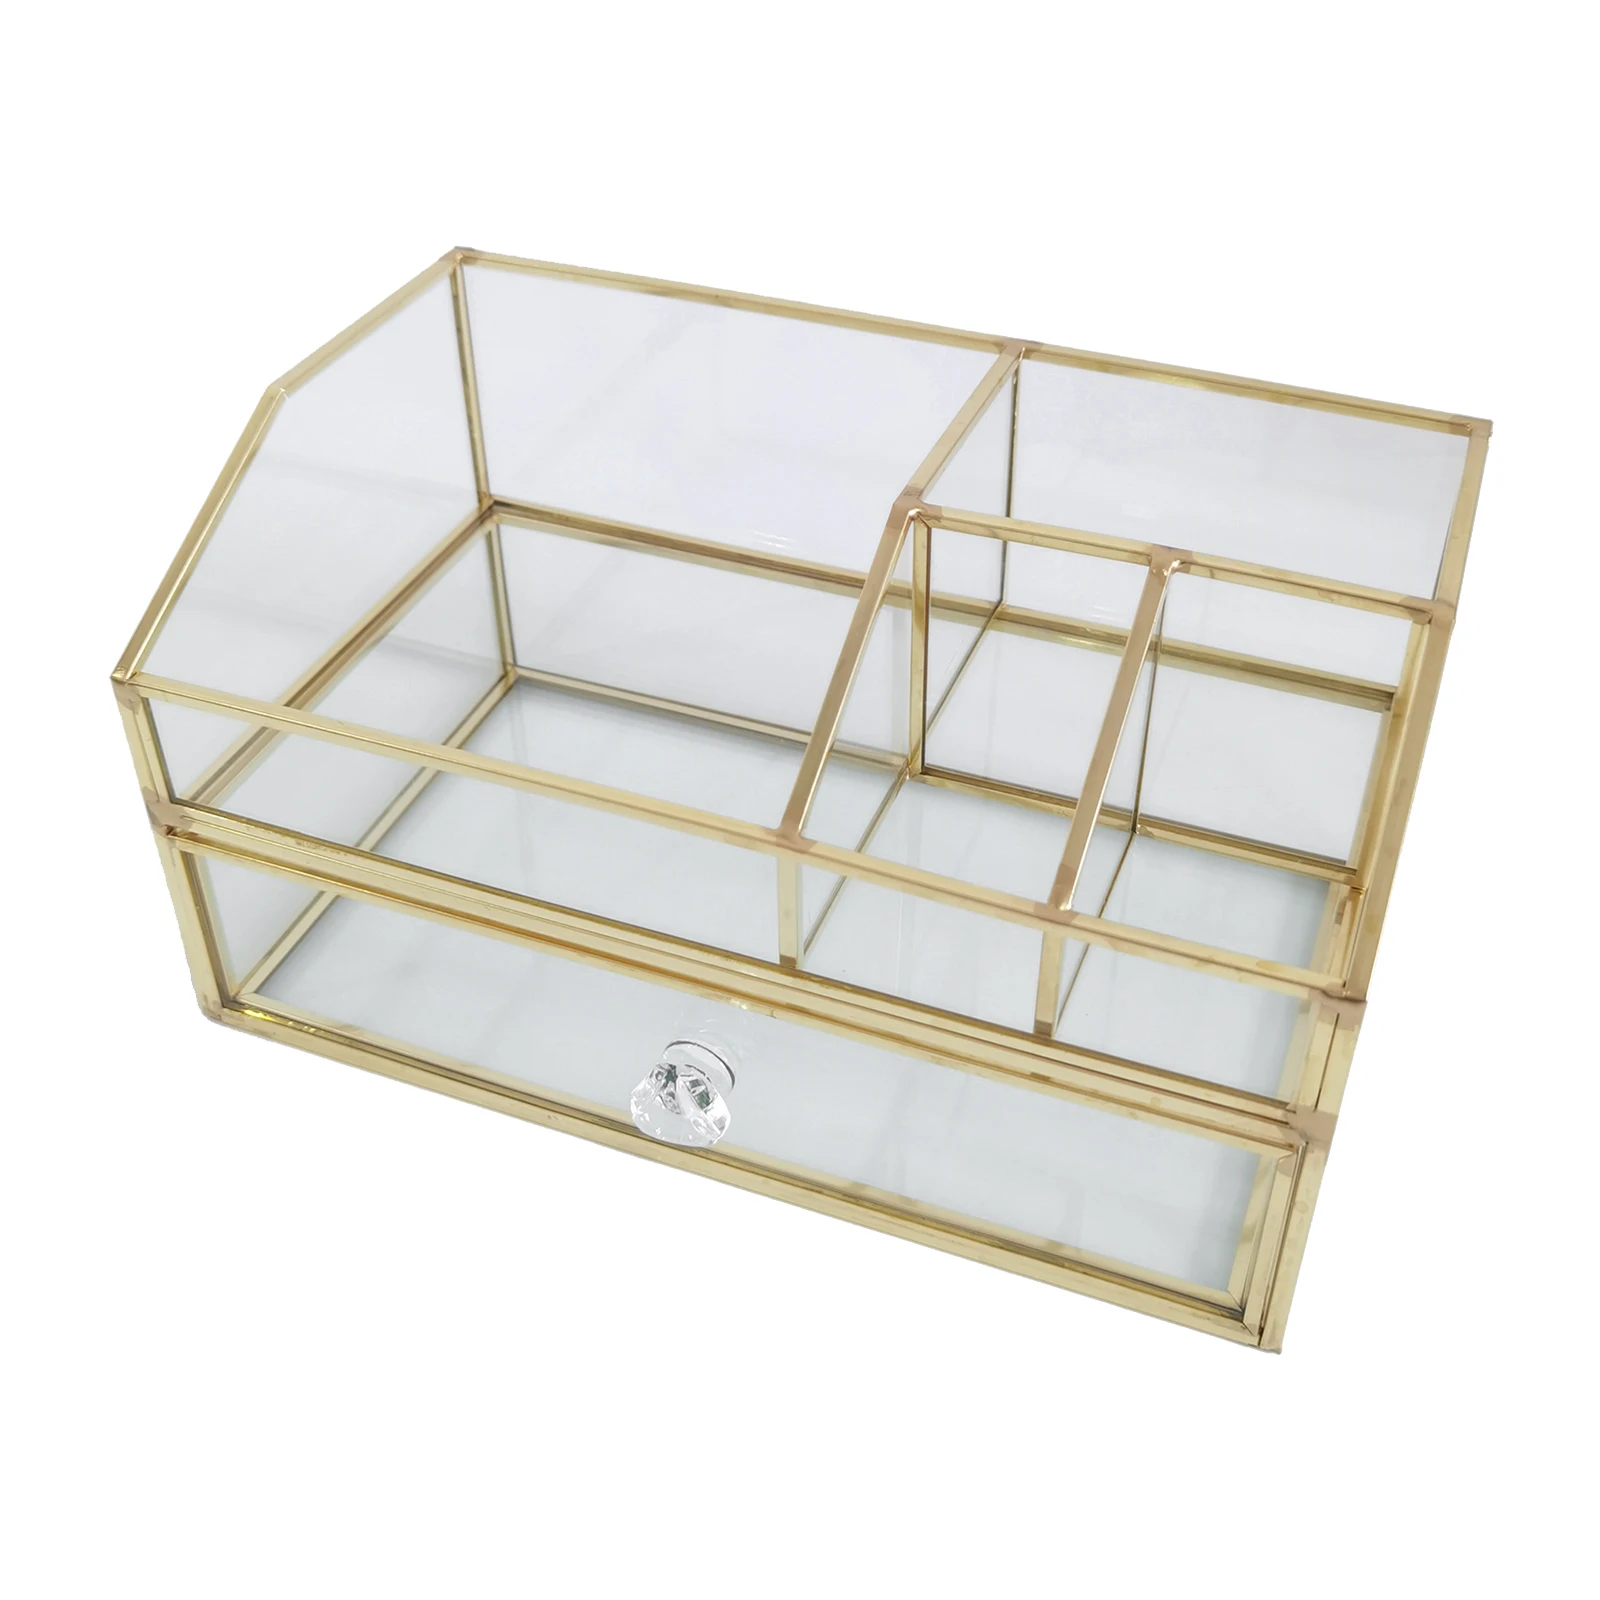 Makeup Organizer Drawers Clear Glass Cosmetic Storage Box Jewelry Container Make Up Case Makeup Brush Holder Organizers Box